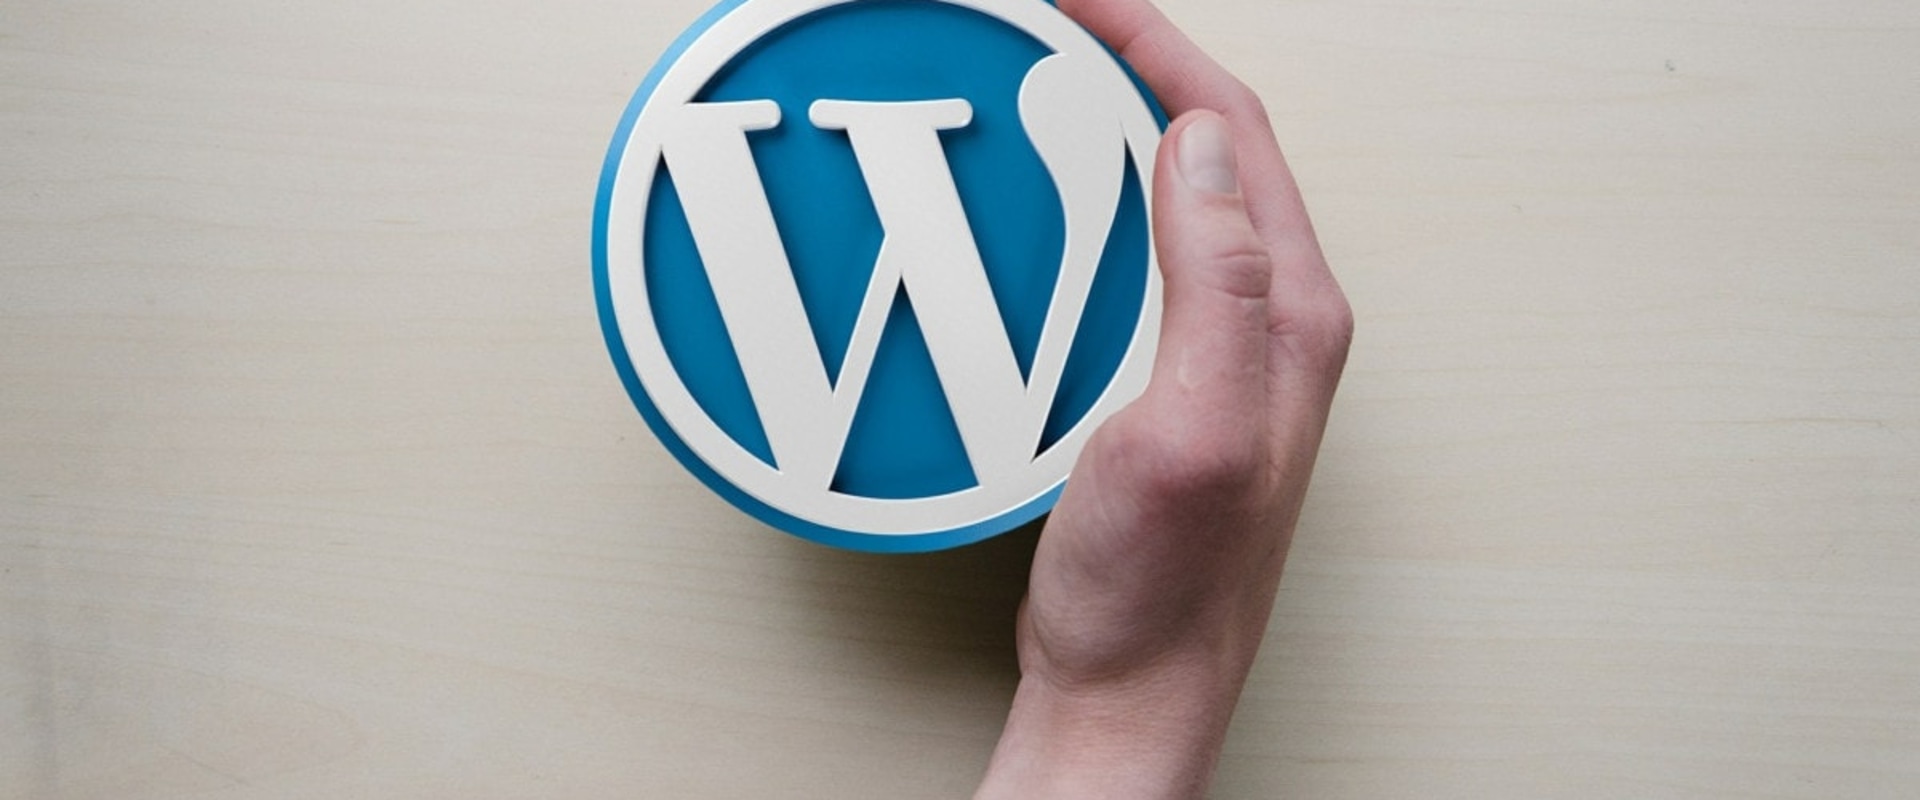 Why is wordpress better for seo?